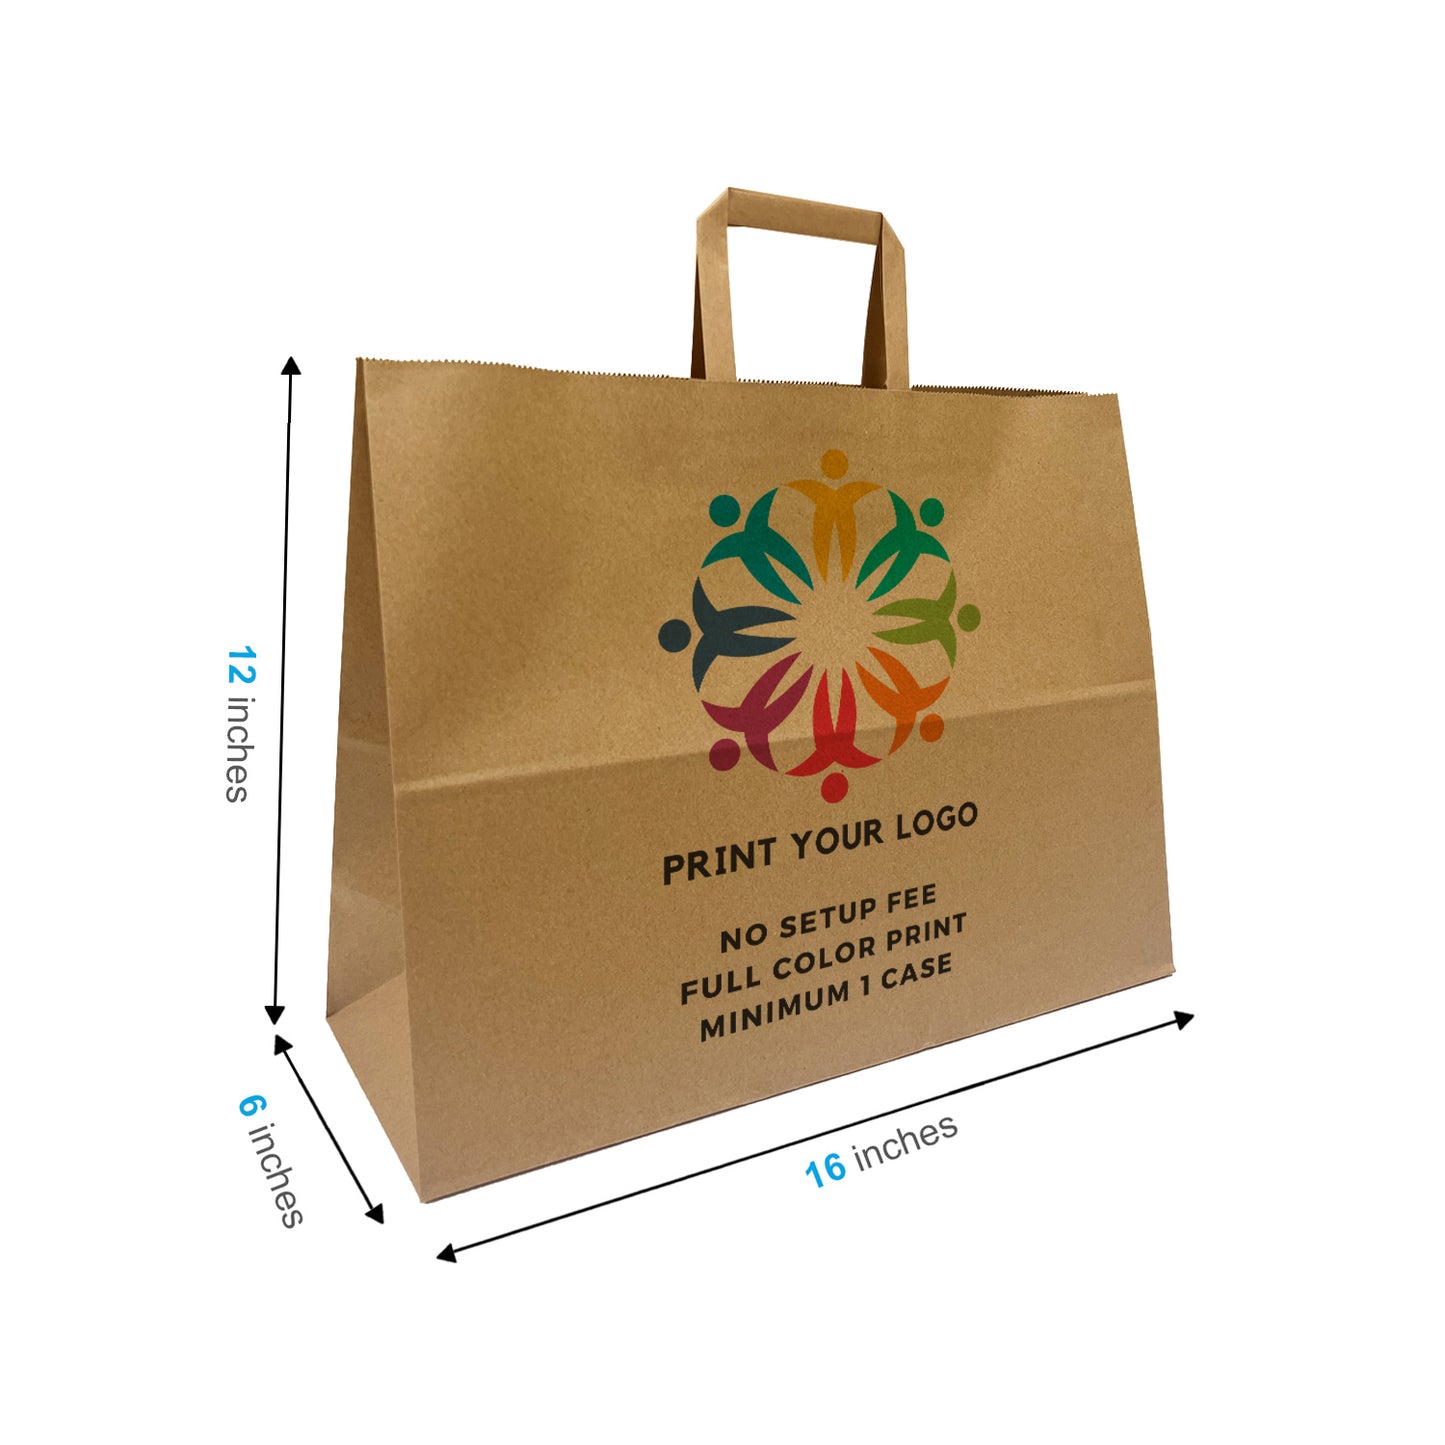 300pcs, Vogue 16x6x12 inches Kraft Paper Bags Twisted Handles; Full Color Custom Print, Printed in Canada